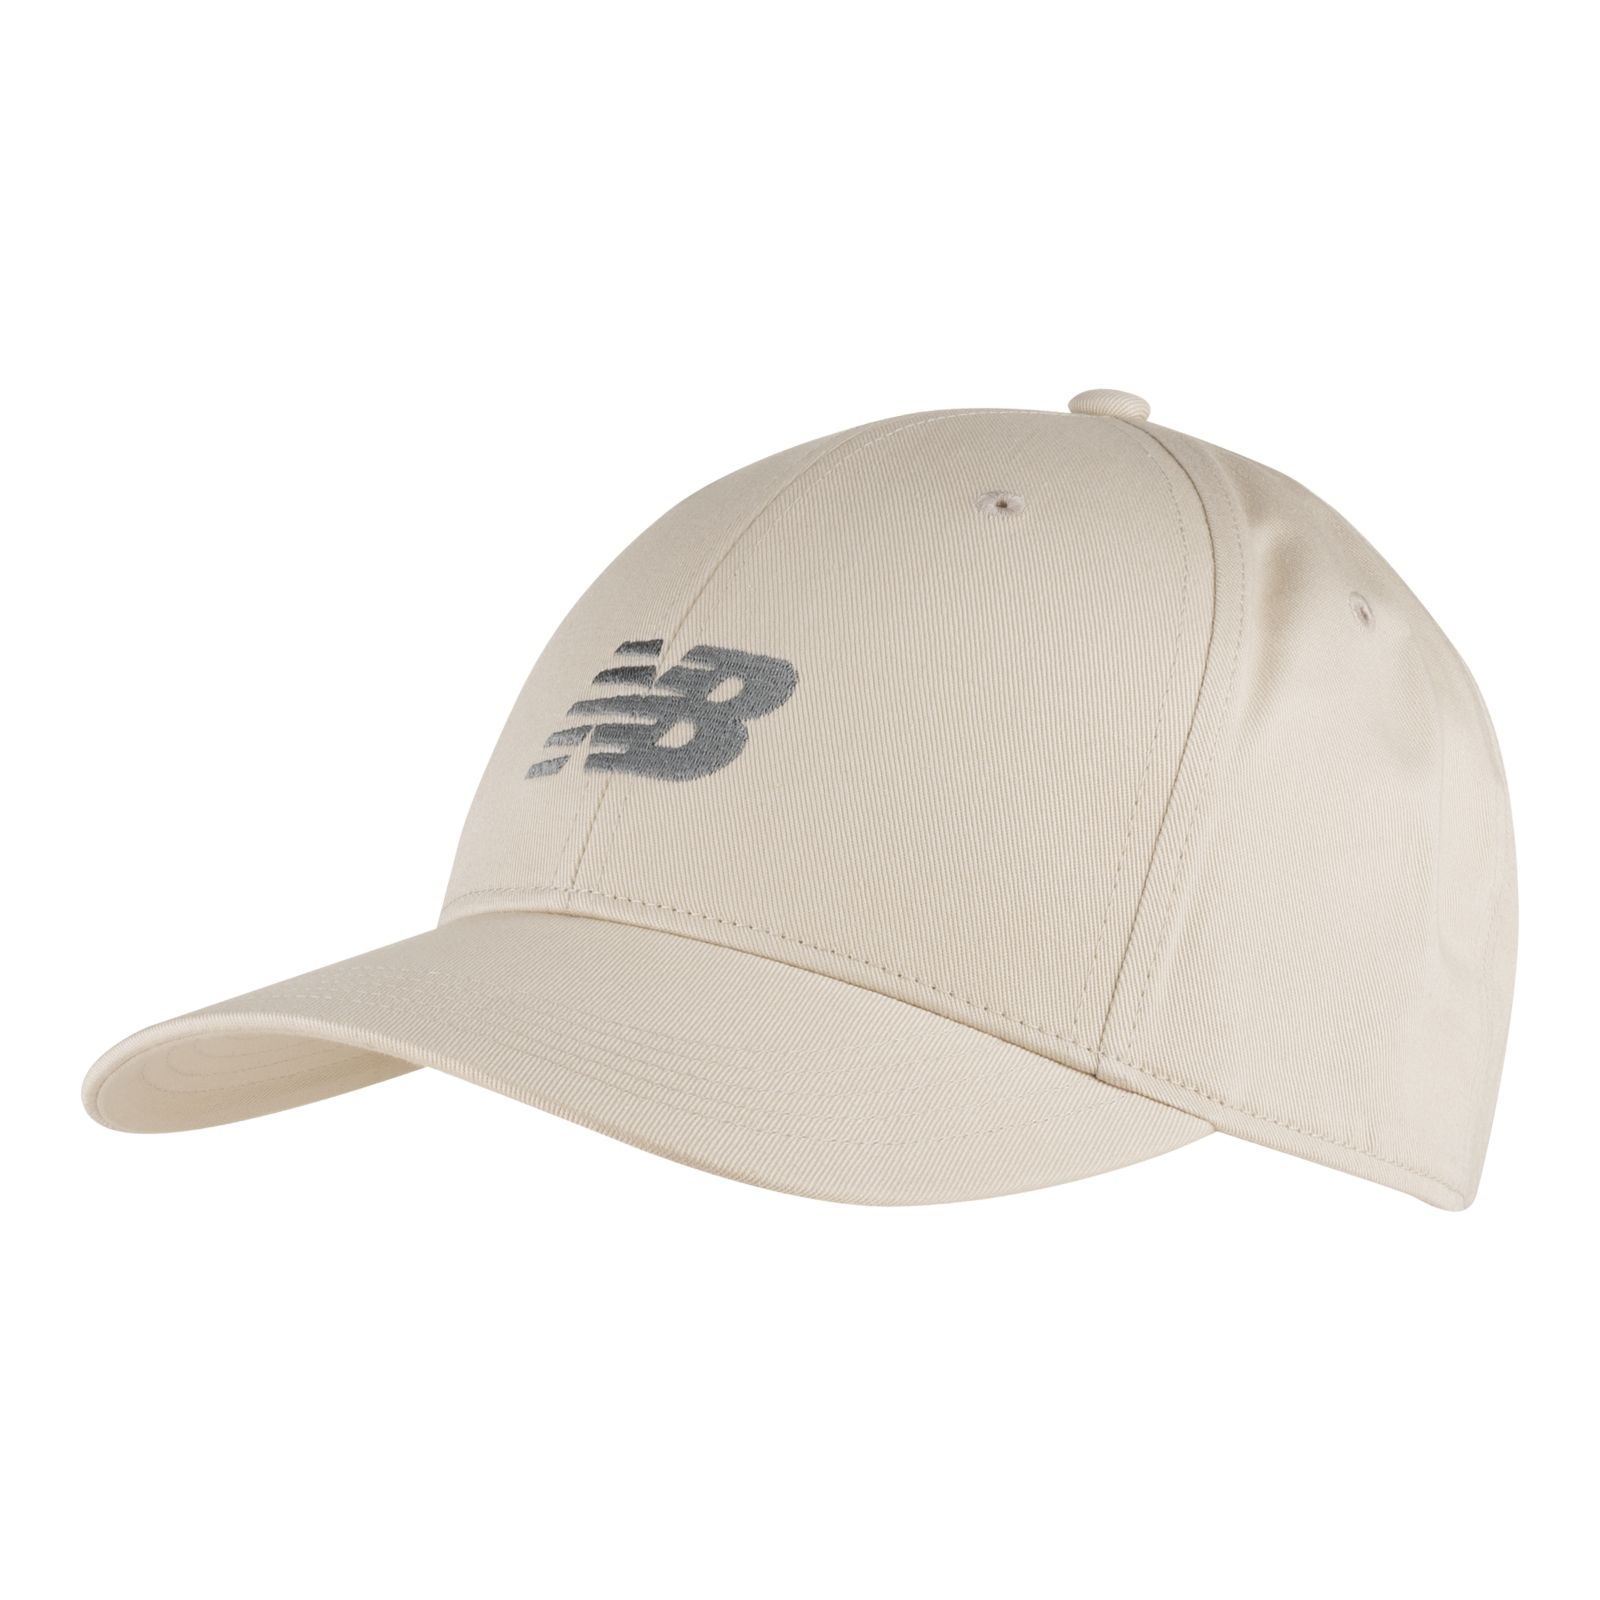 10 Pack Foam Beige Baseball Cap With Peaked Visor Core And Snapback Panel  Replacement Brim For Hard Hats And Liners From Whitedew, $8.03